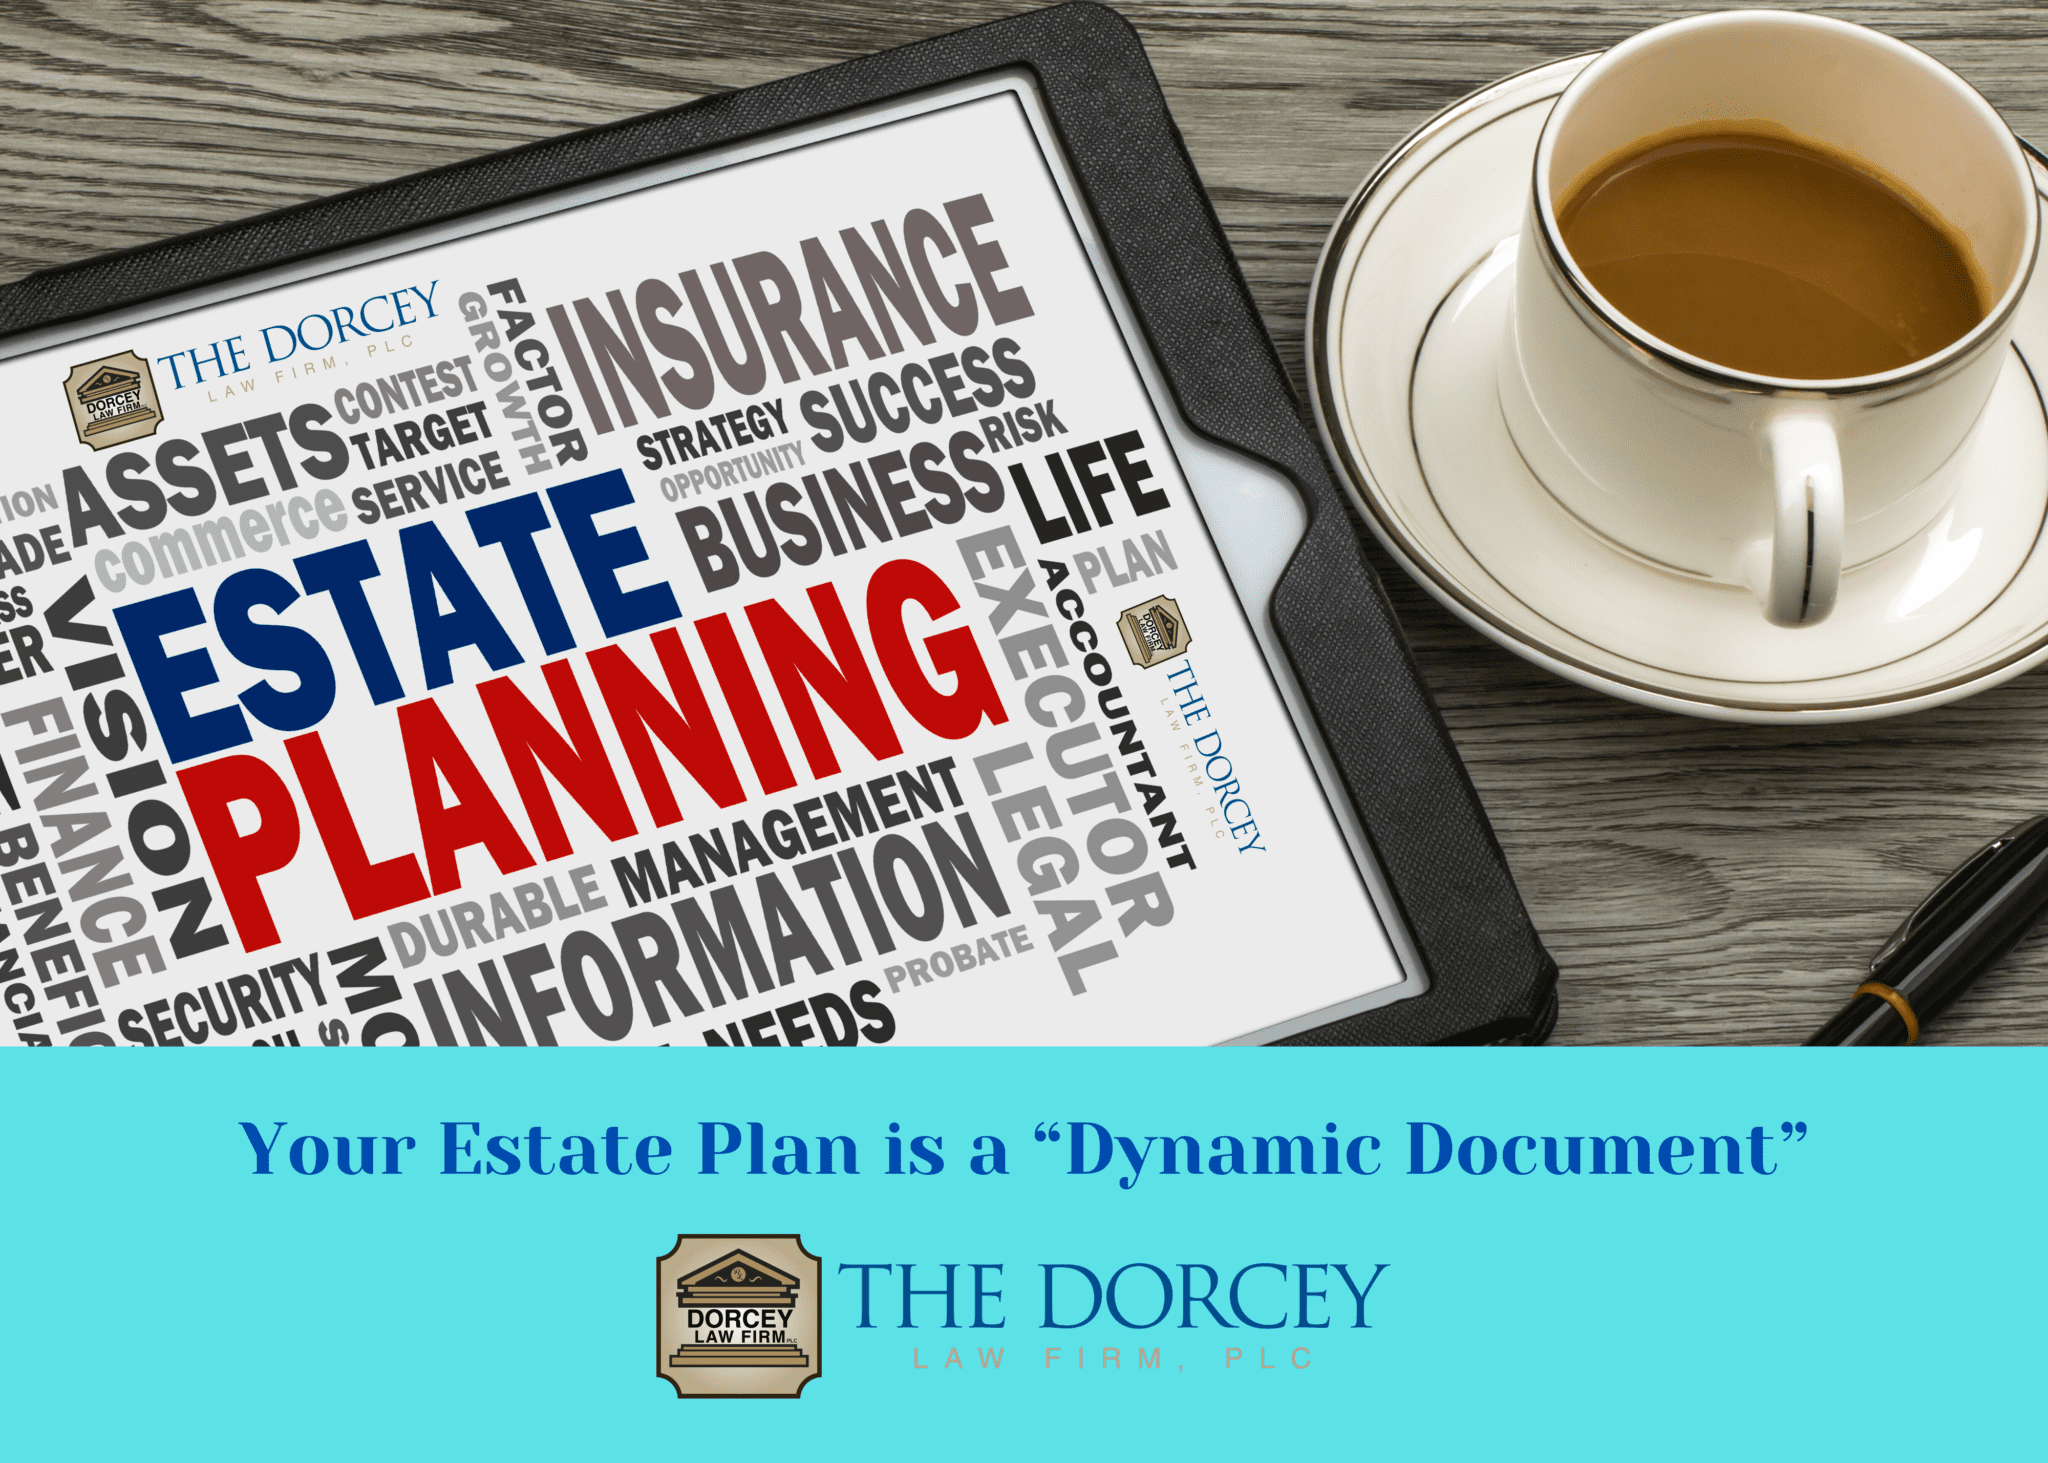 Your Estate Plan Is a “Dynamic Document”